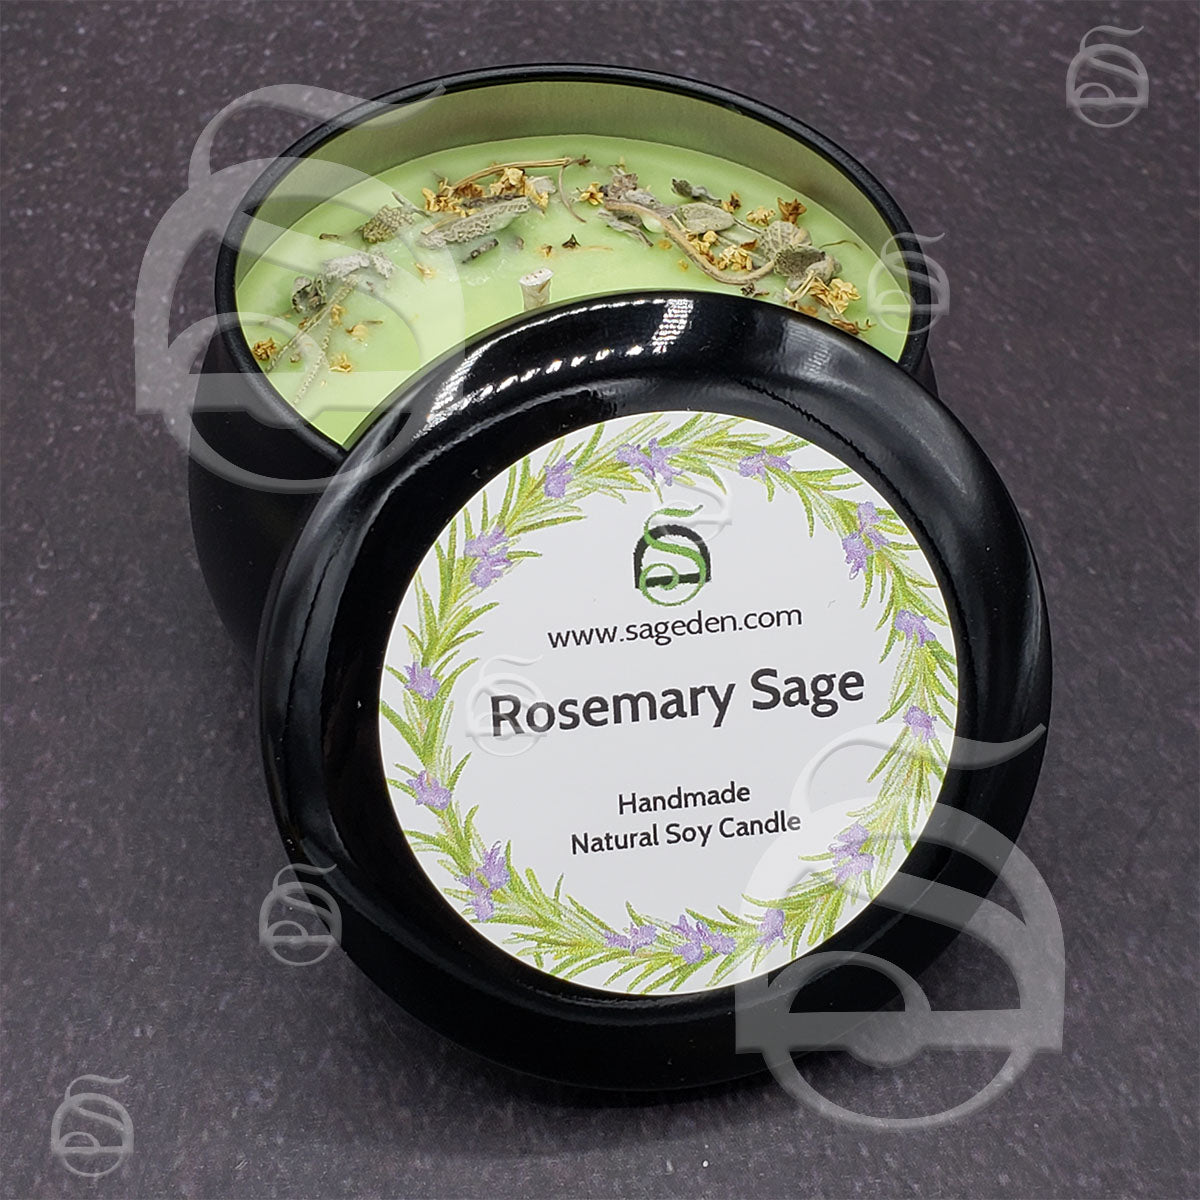 Rosemary Sage Candle (Sage Den Product)